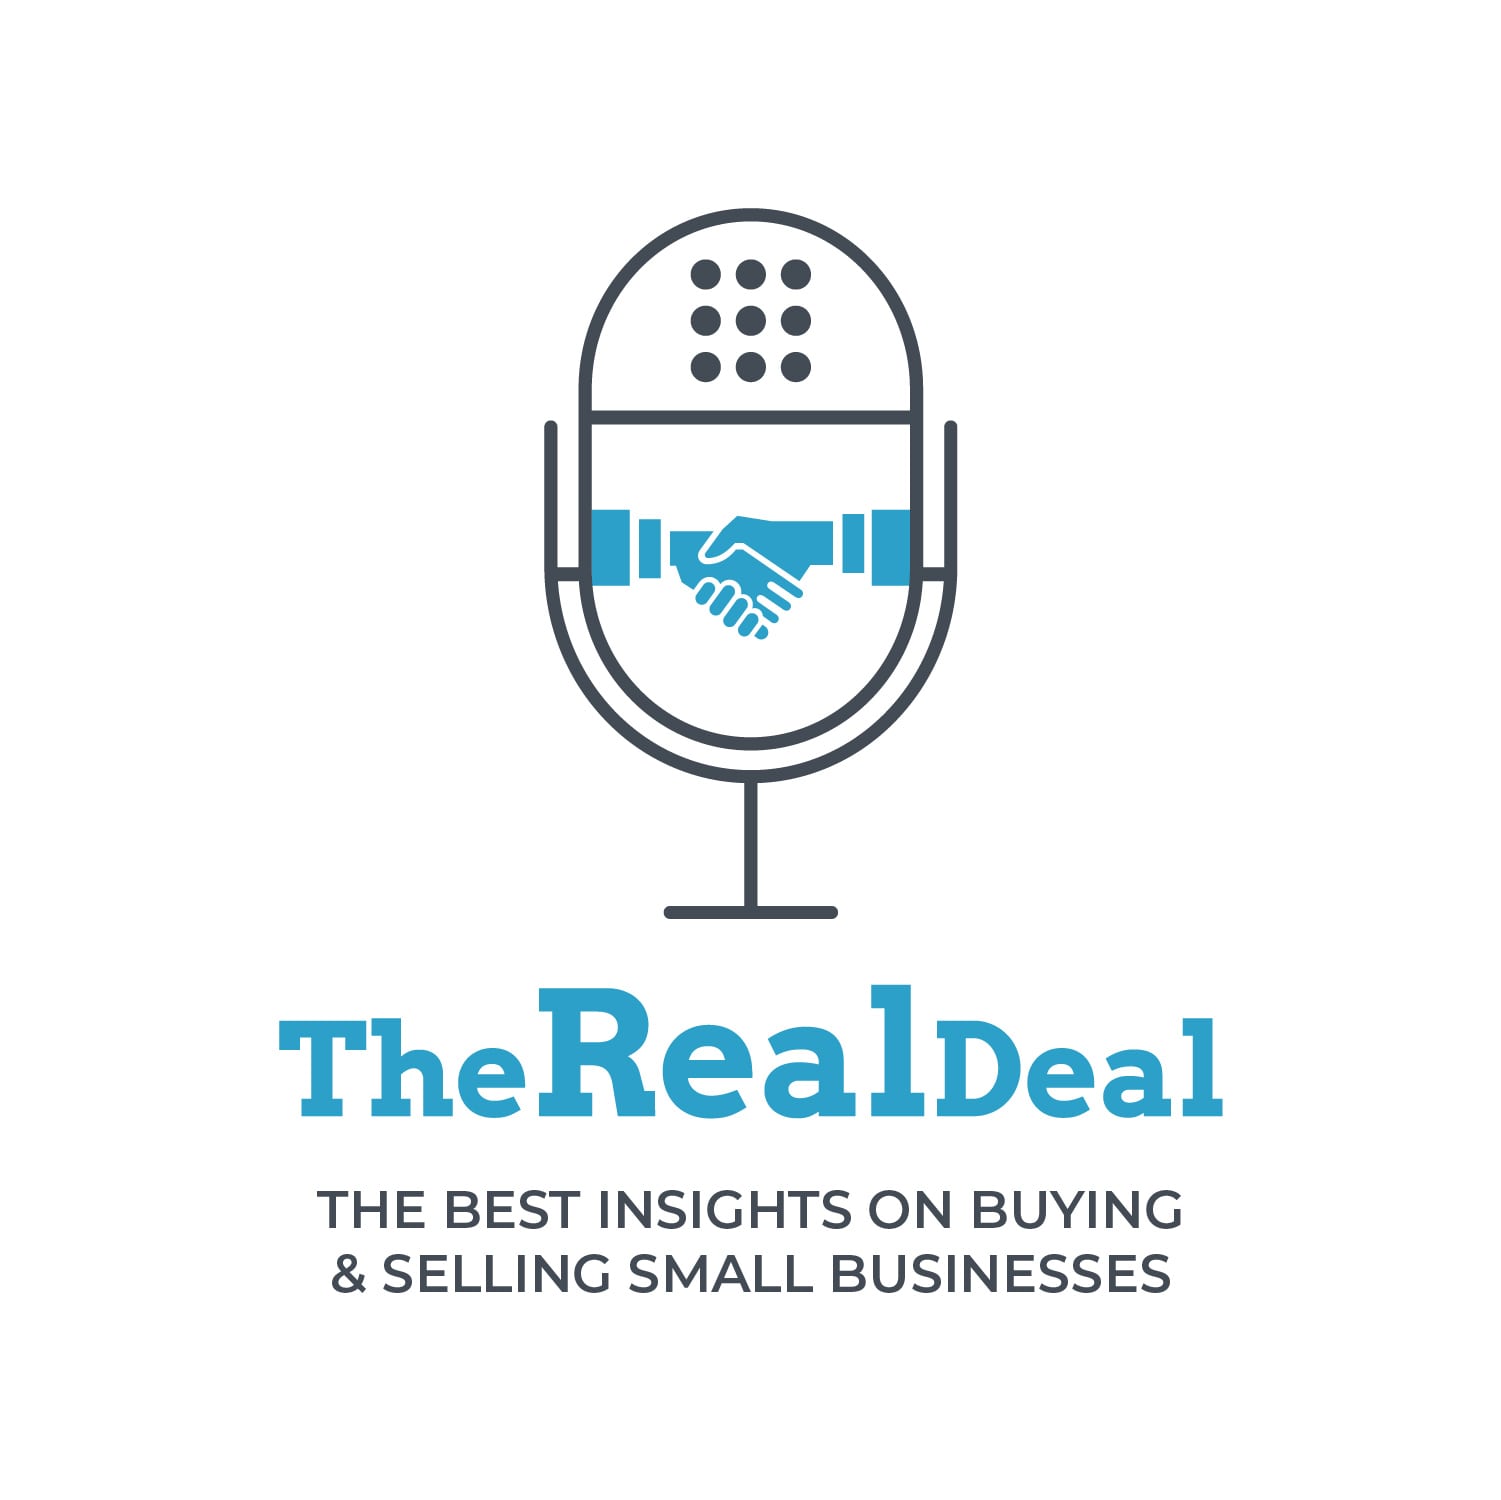 TheRealDeal branding